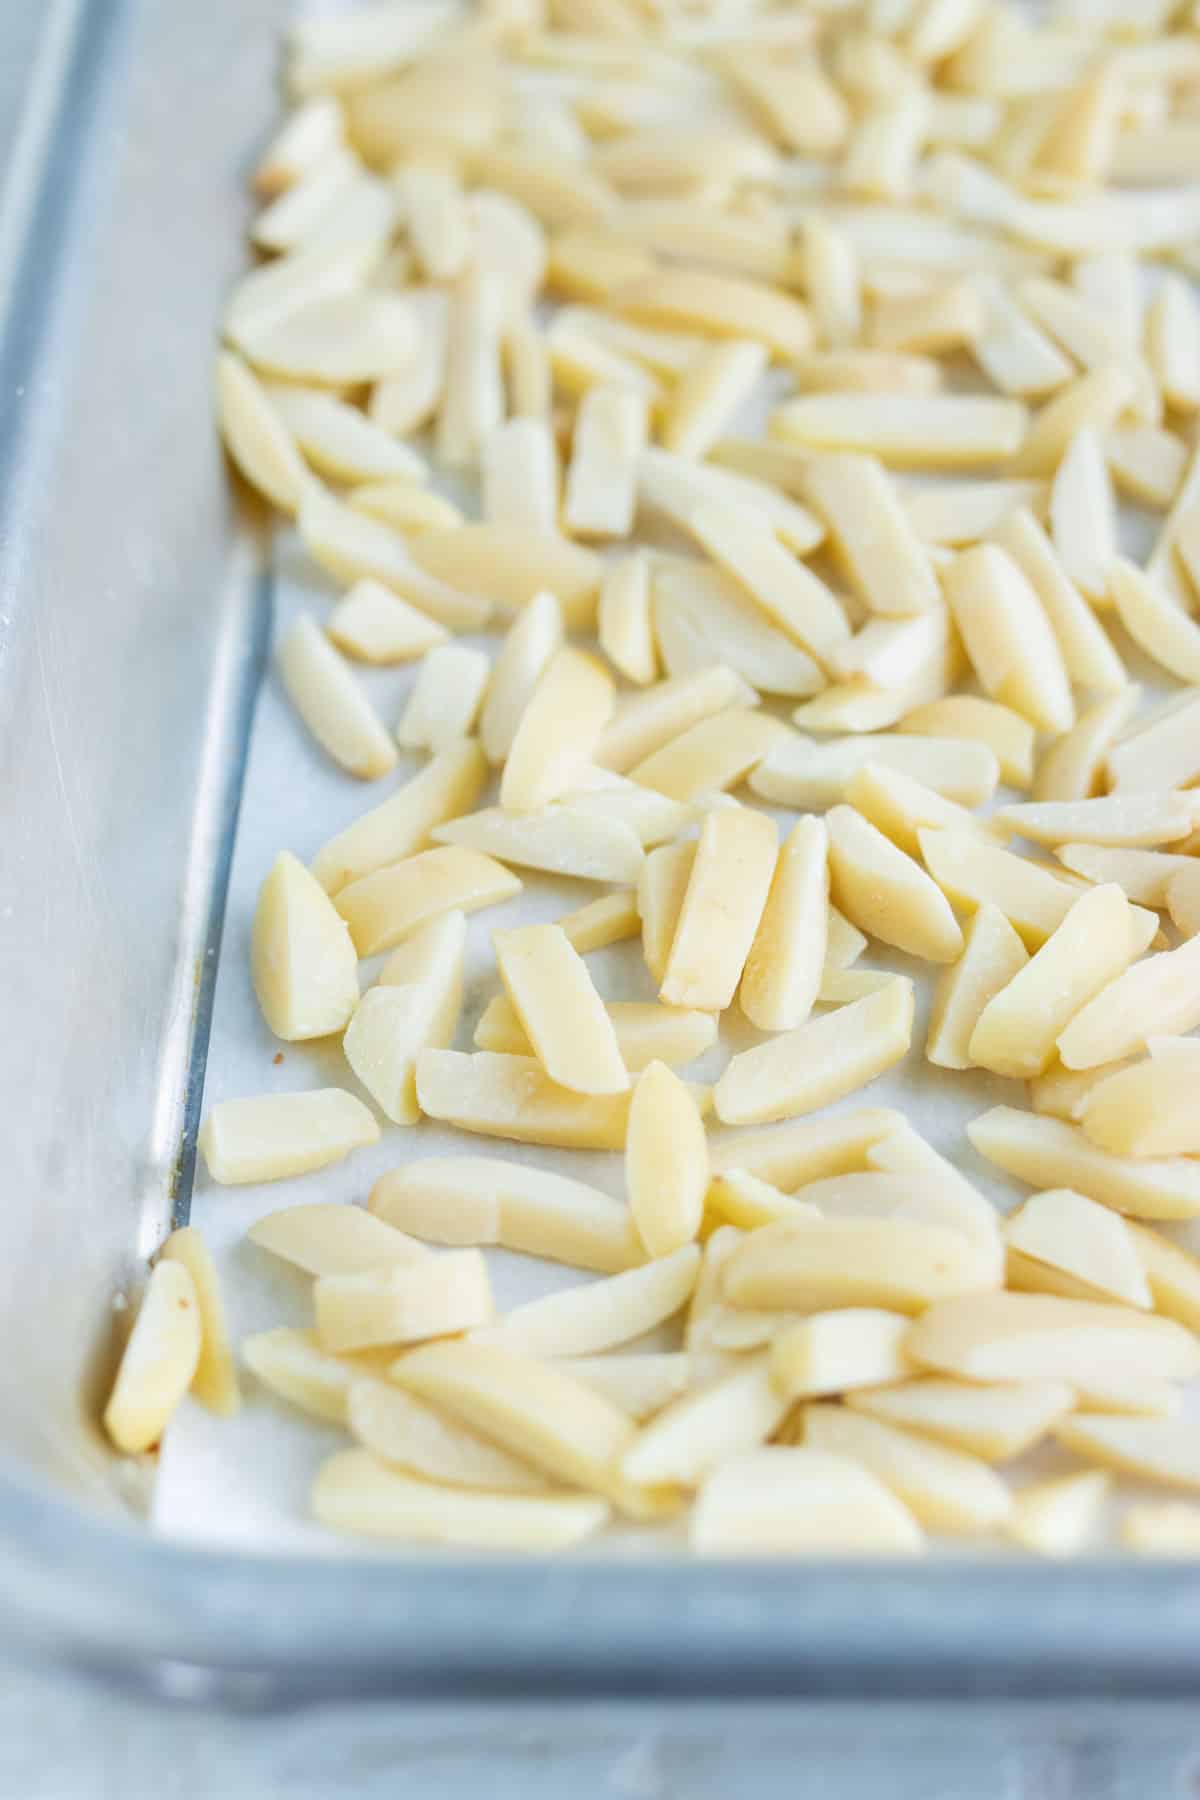 Slivered almonds are spread out on a sheet pan evenly before roasting.